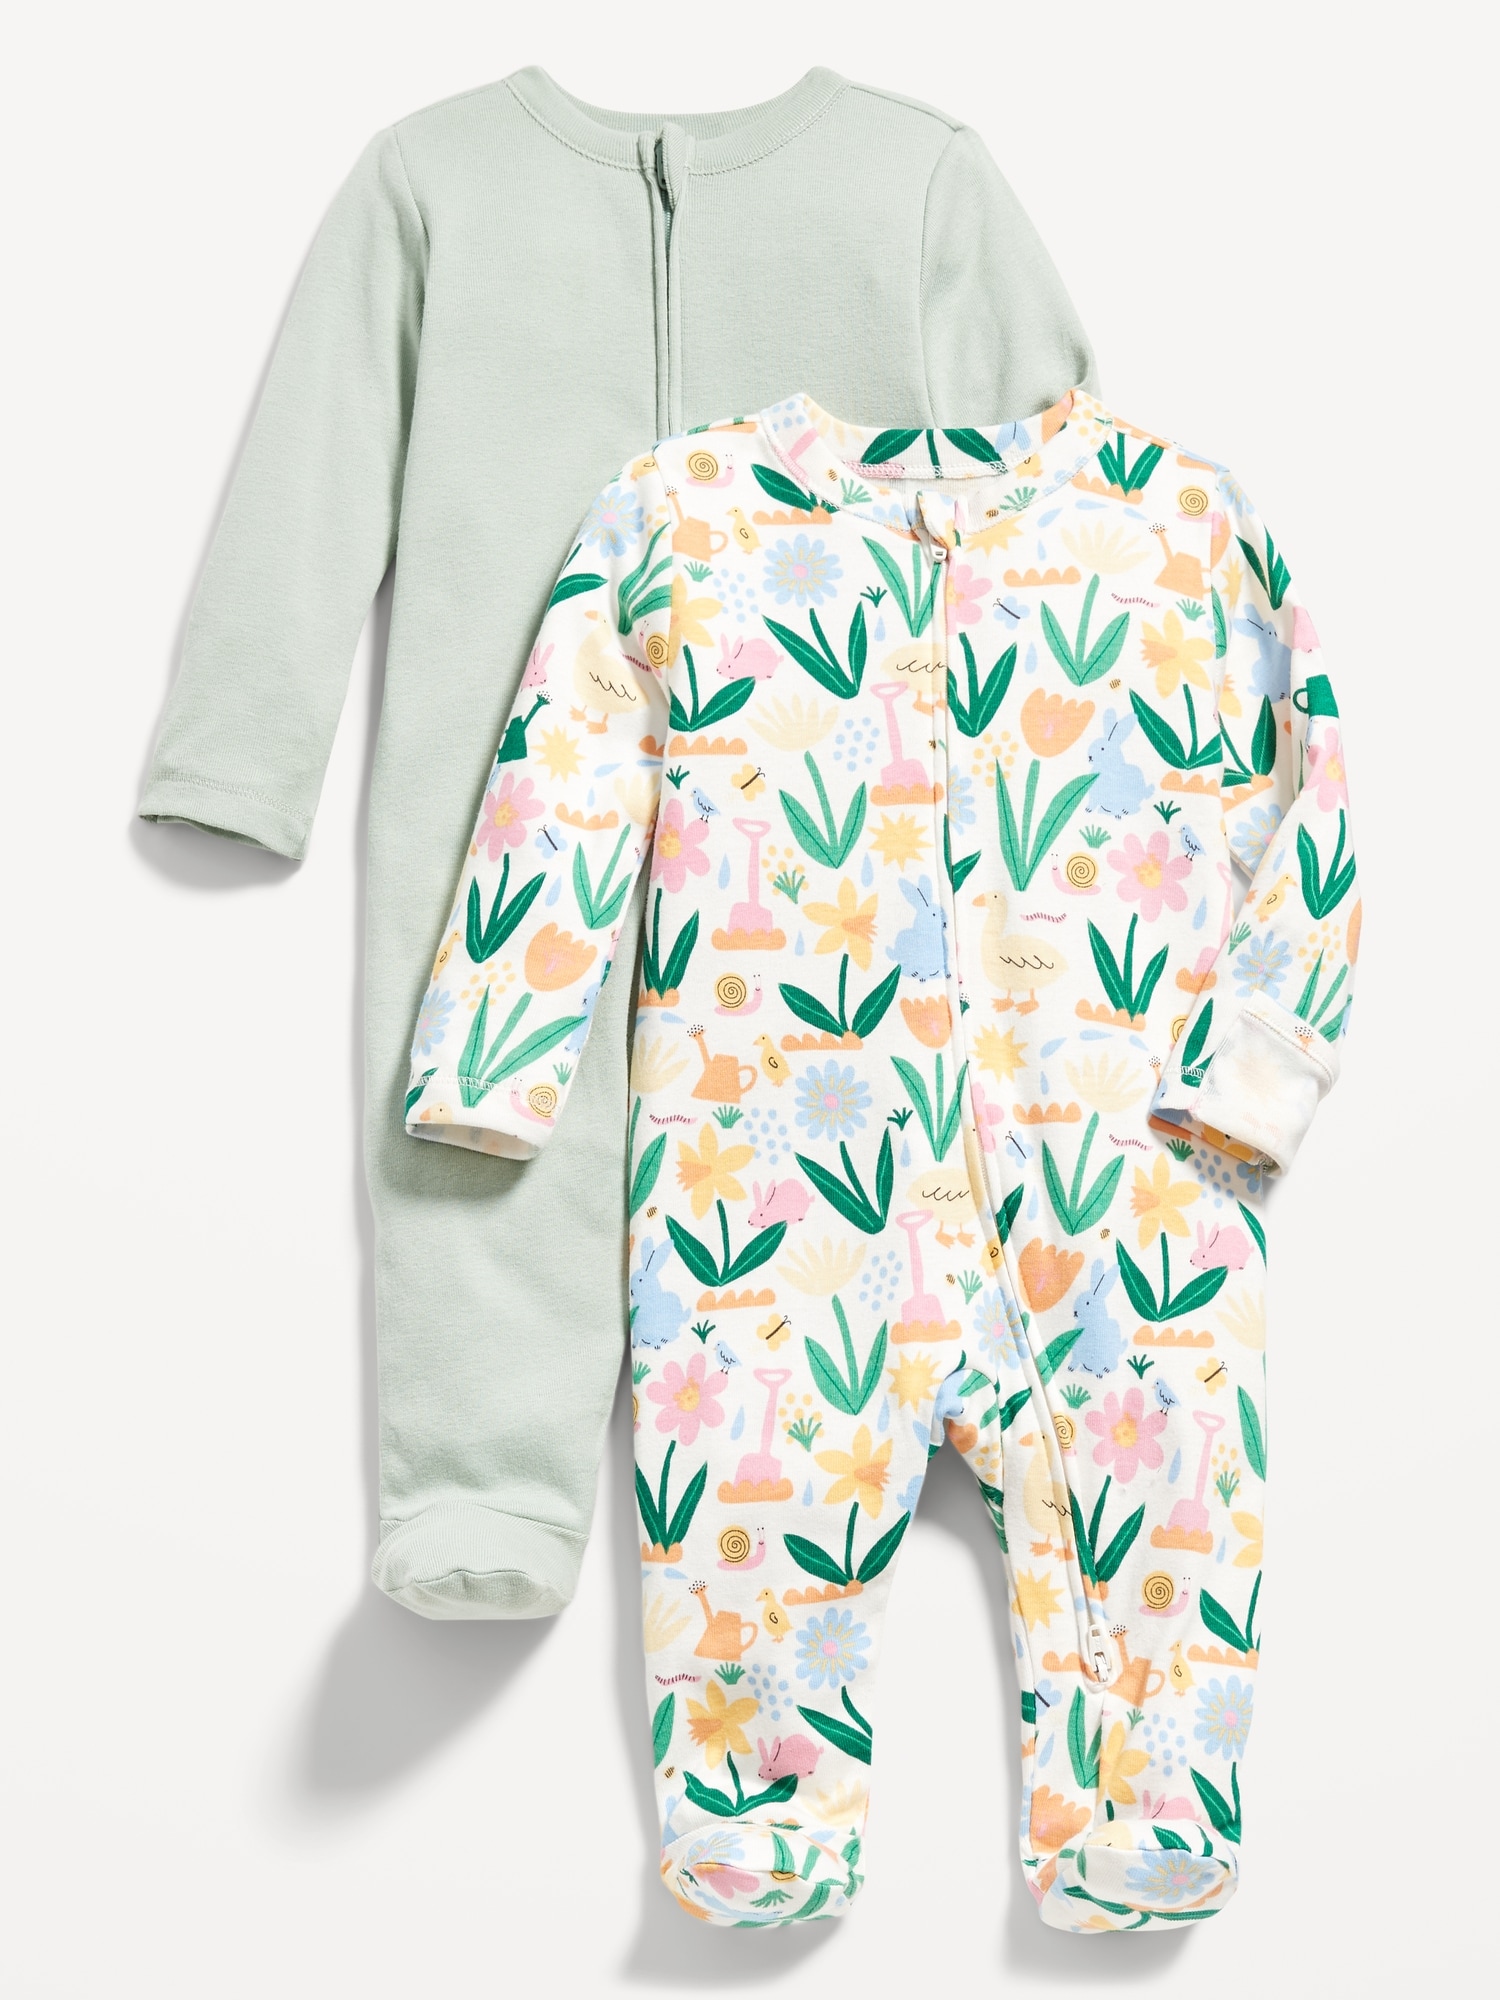 Old Navy Unisex Sleep & Play 2-Way-Zip Footed One-Piece 2-Pack for Baby white. 1